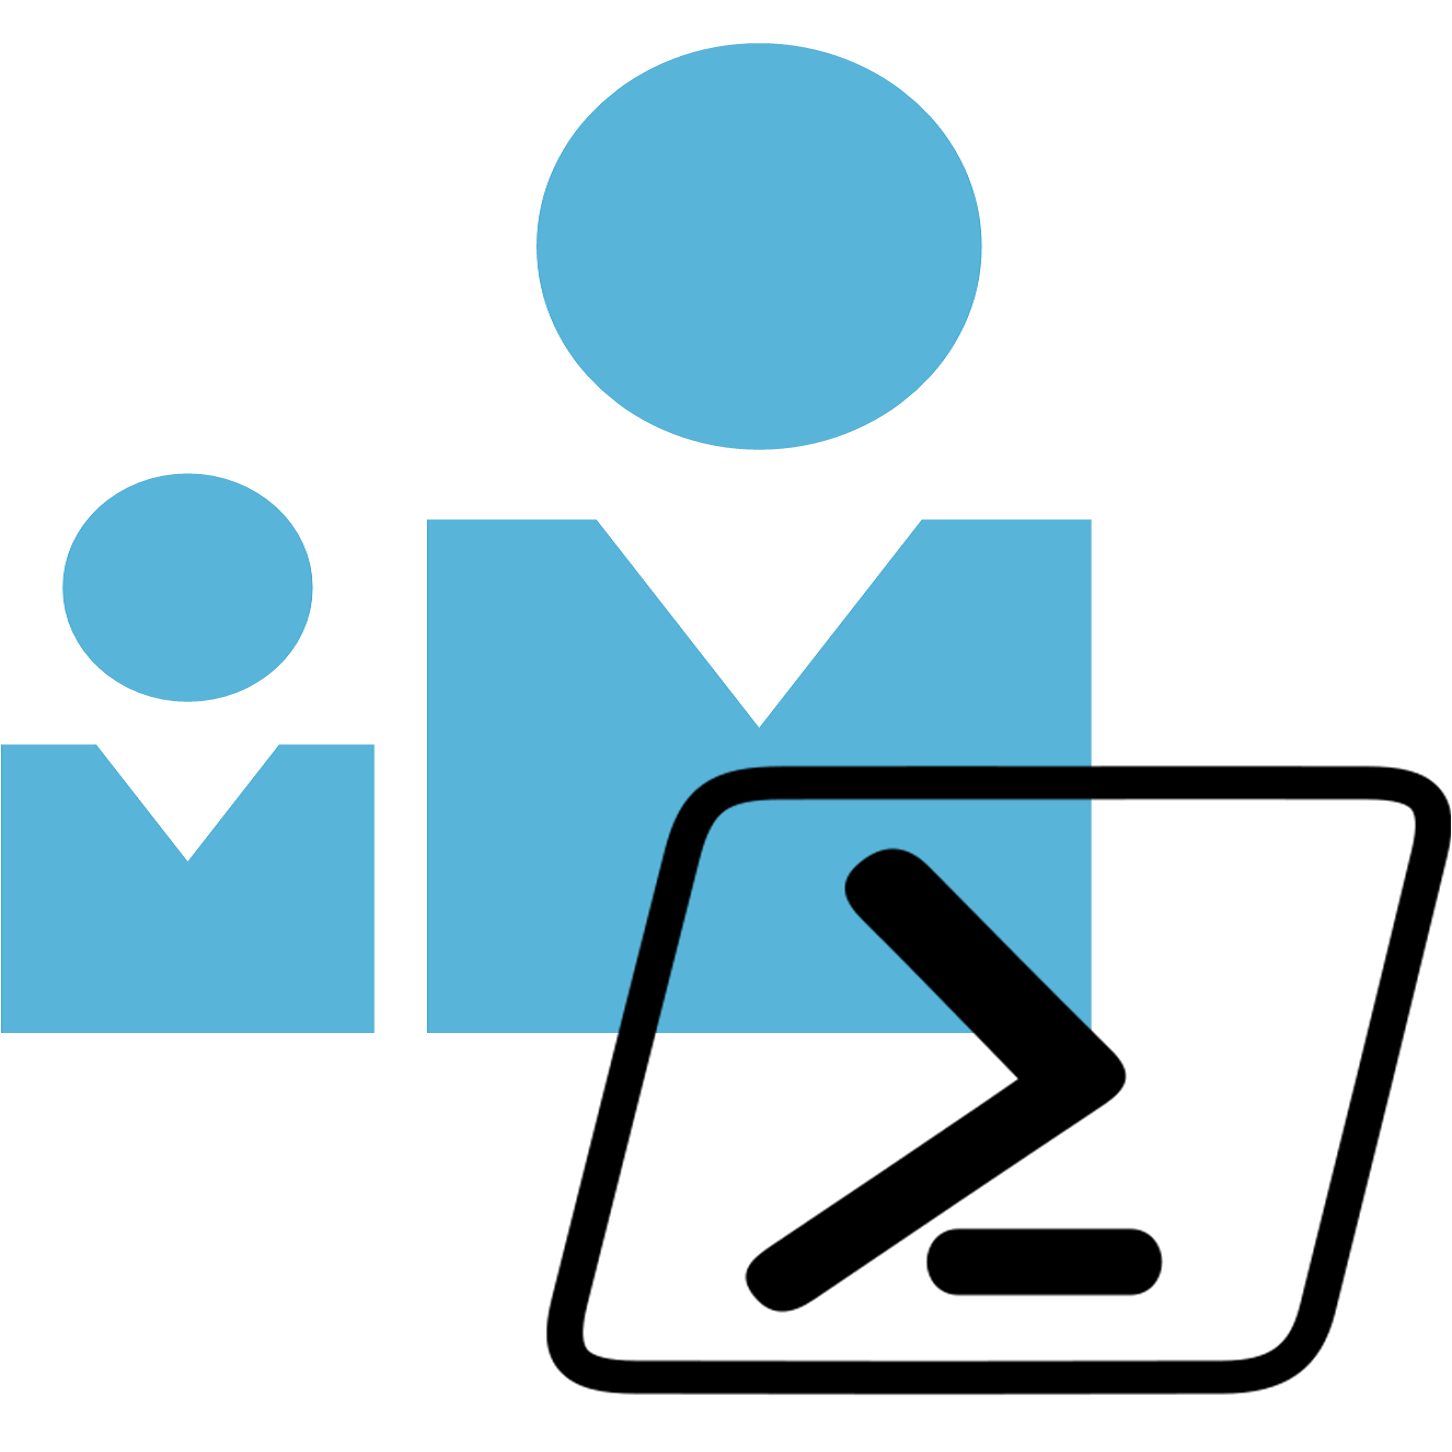 Get insight into your Azure RBAC role assignments